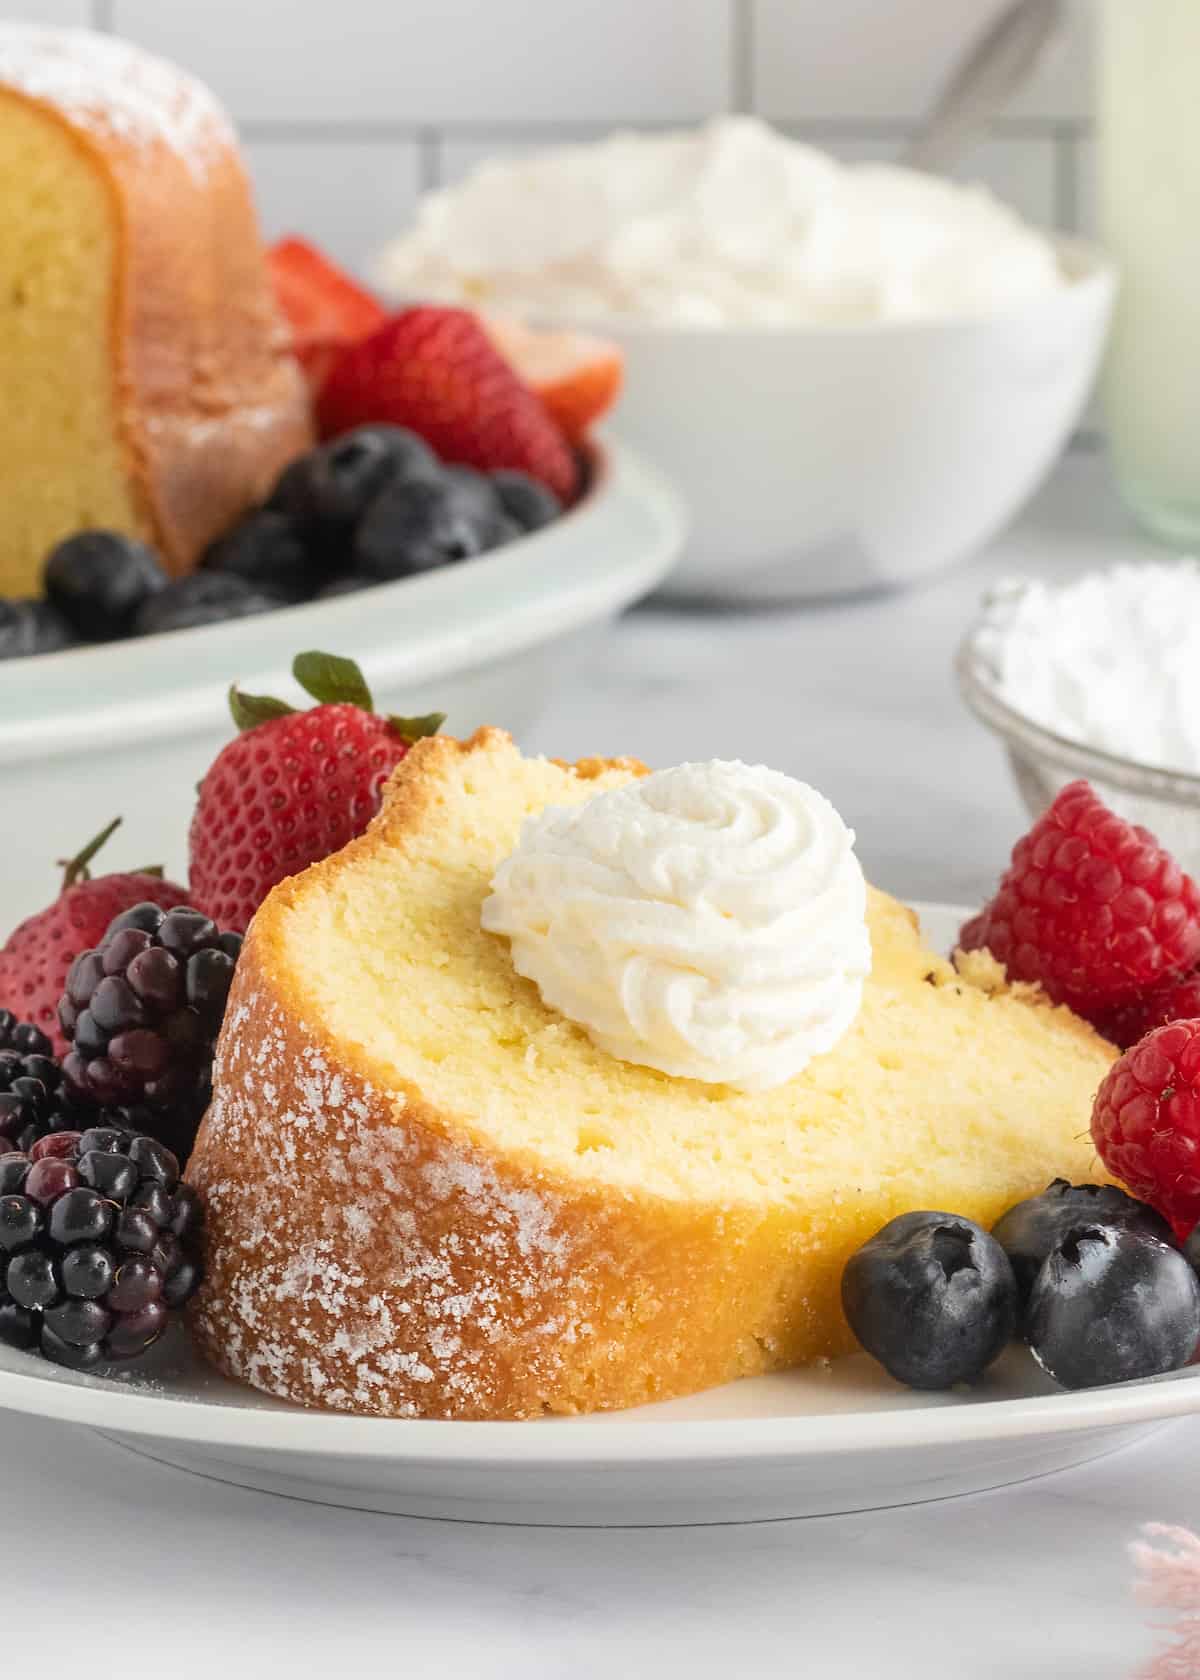 SuSu's Sour Cream Pound Cake from The Baker Mama